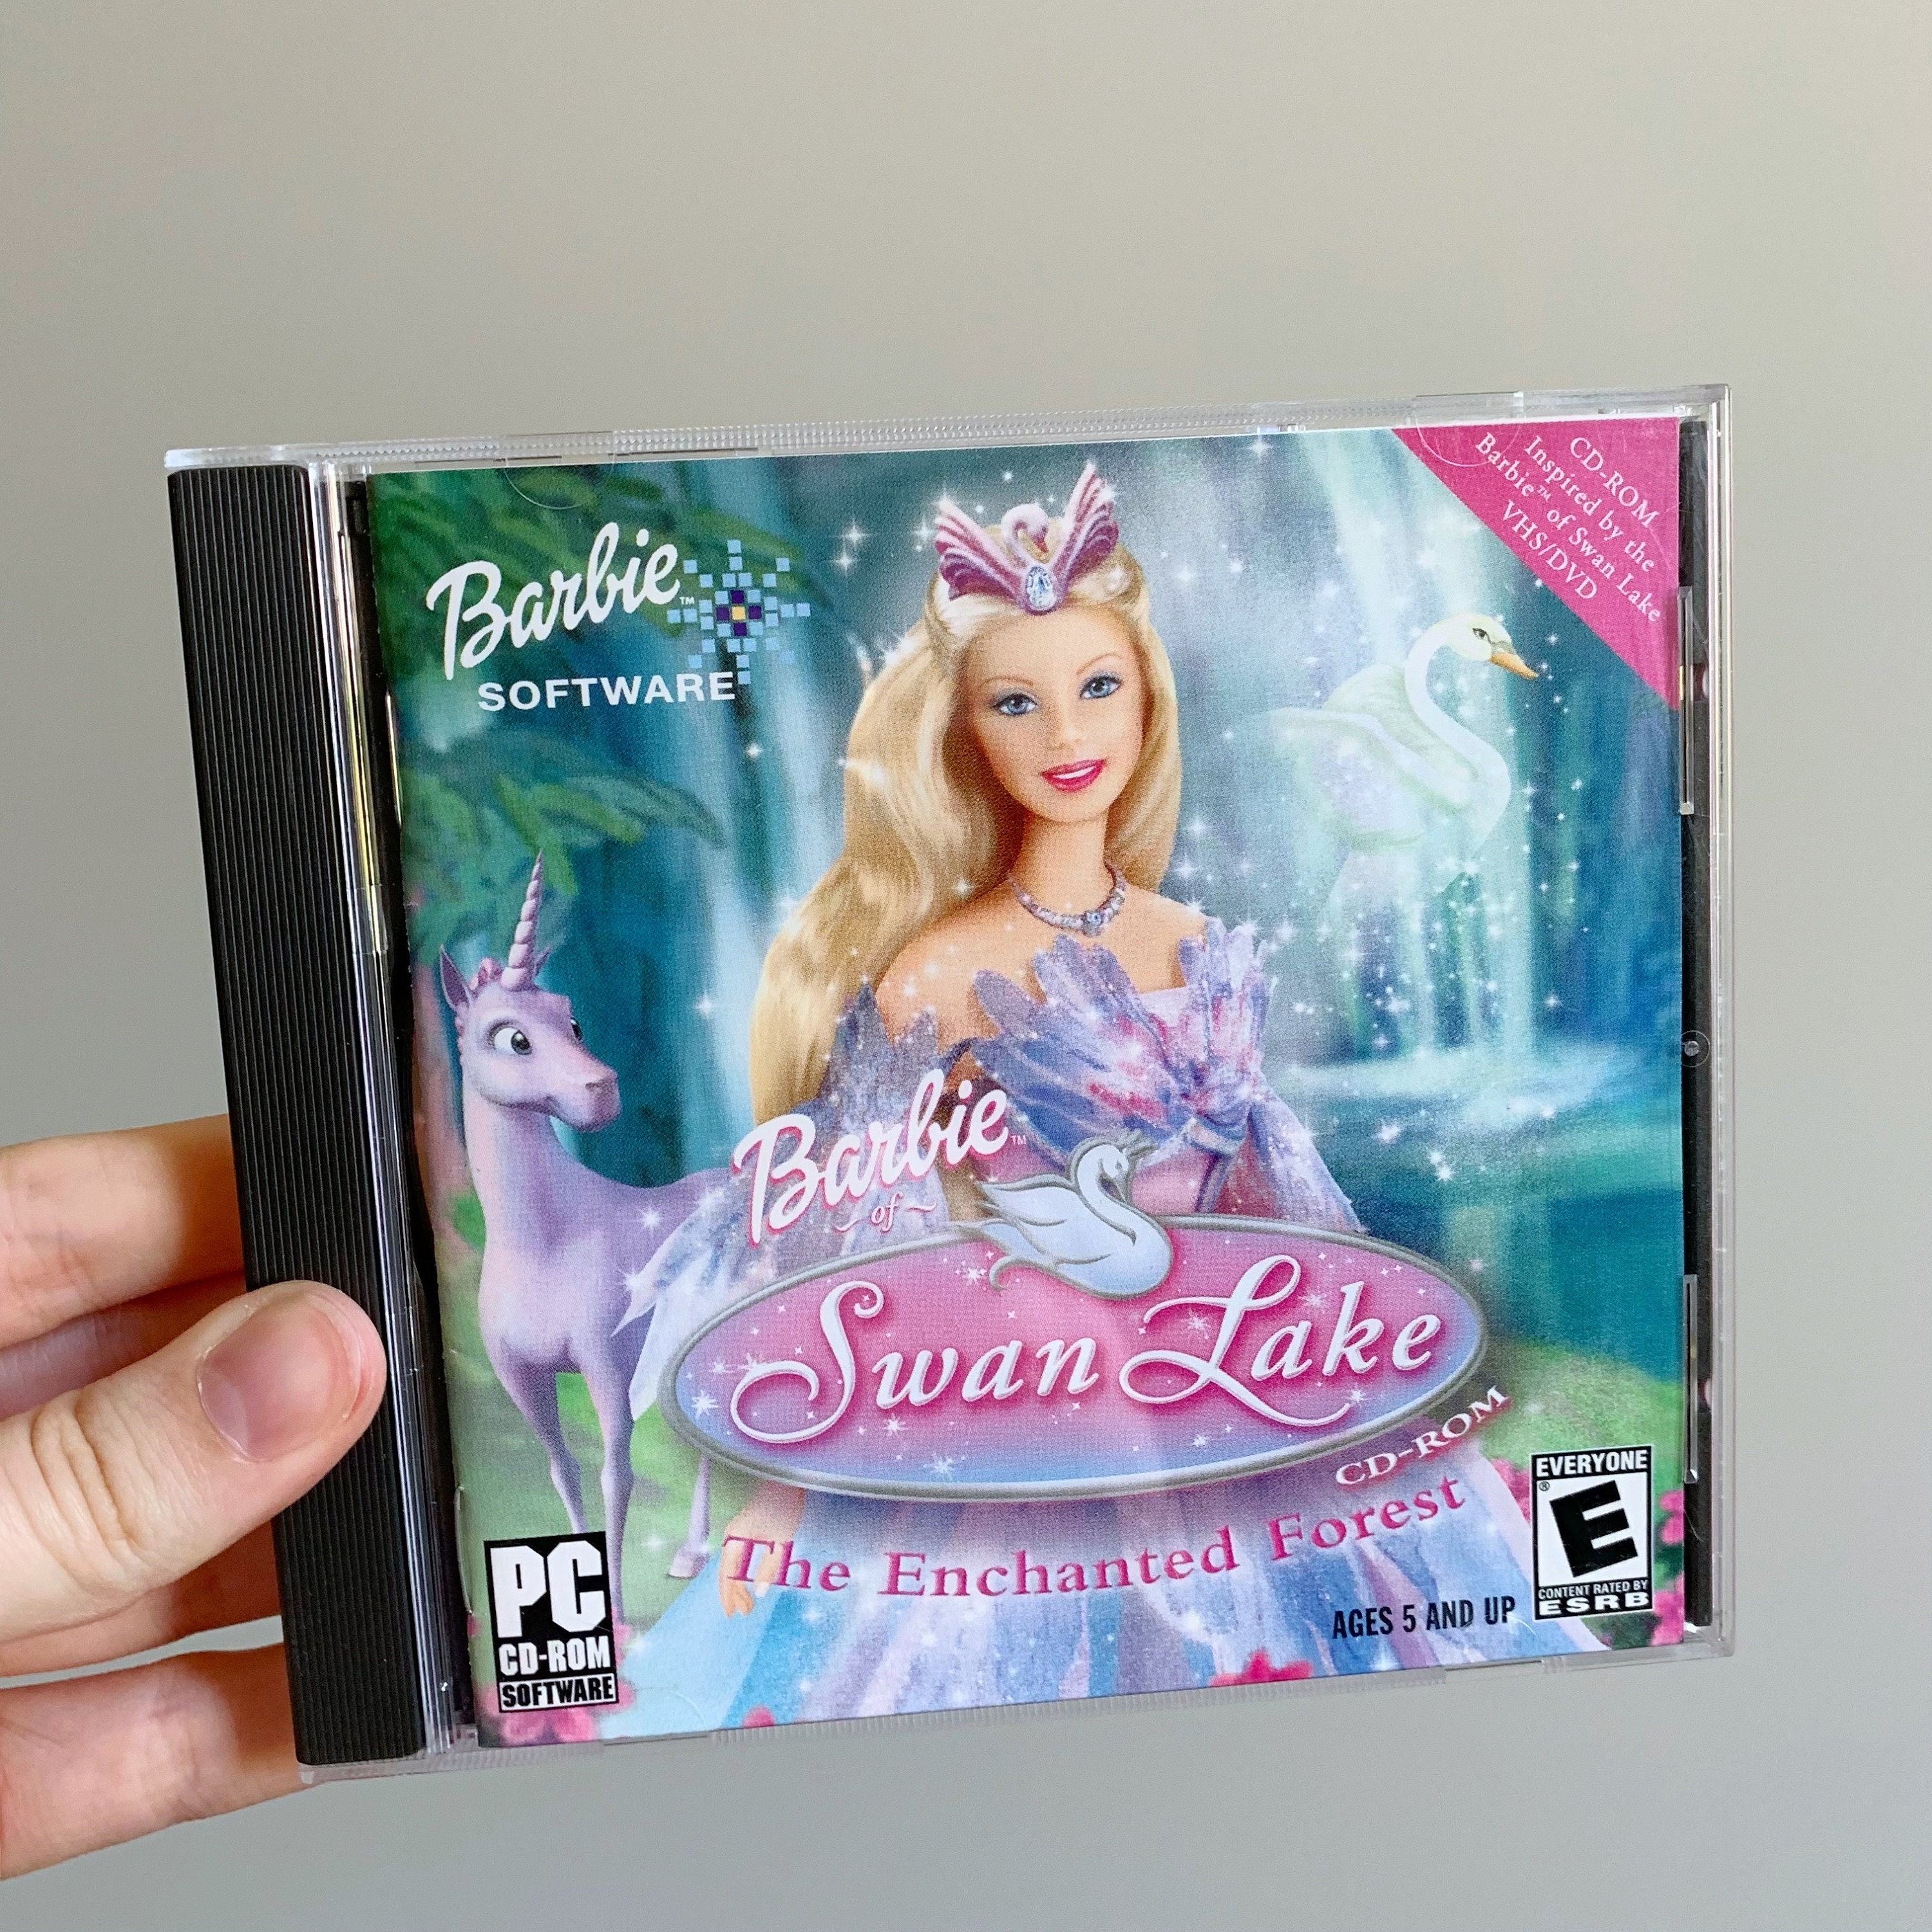 Barbie Swan Lake the Enchanted Forest CD ROM Computer Game - Etsy Finland